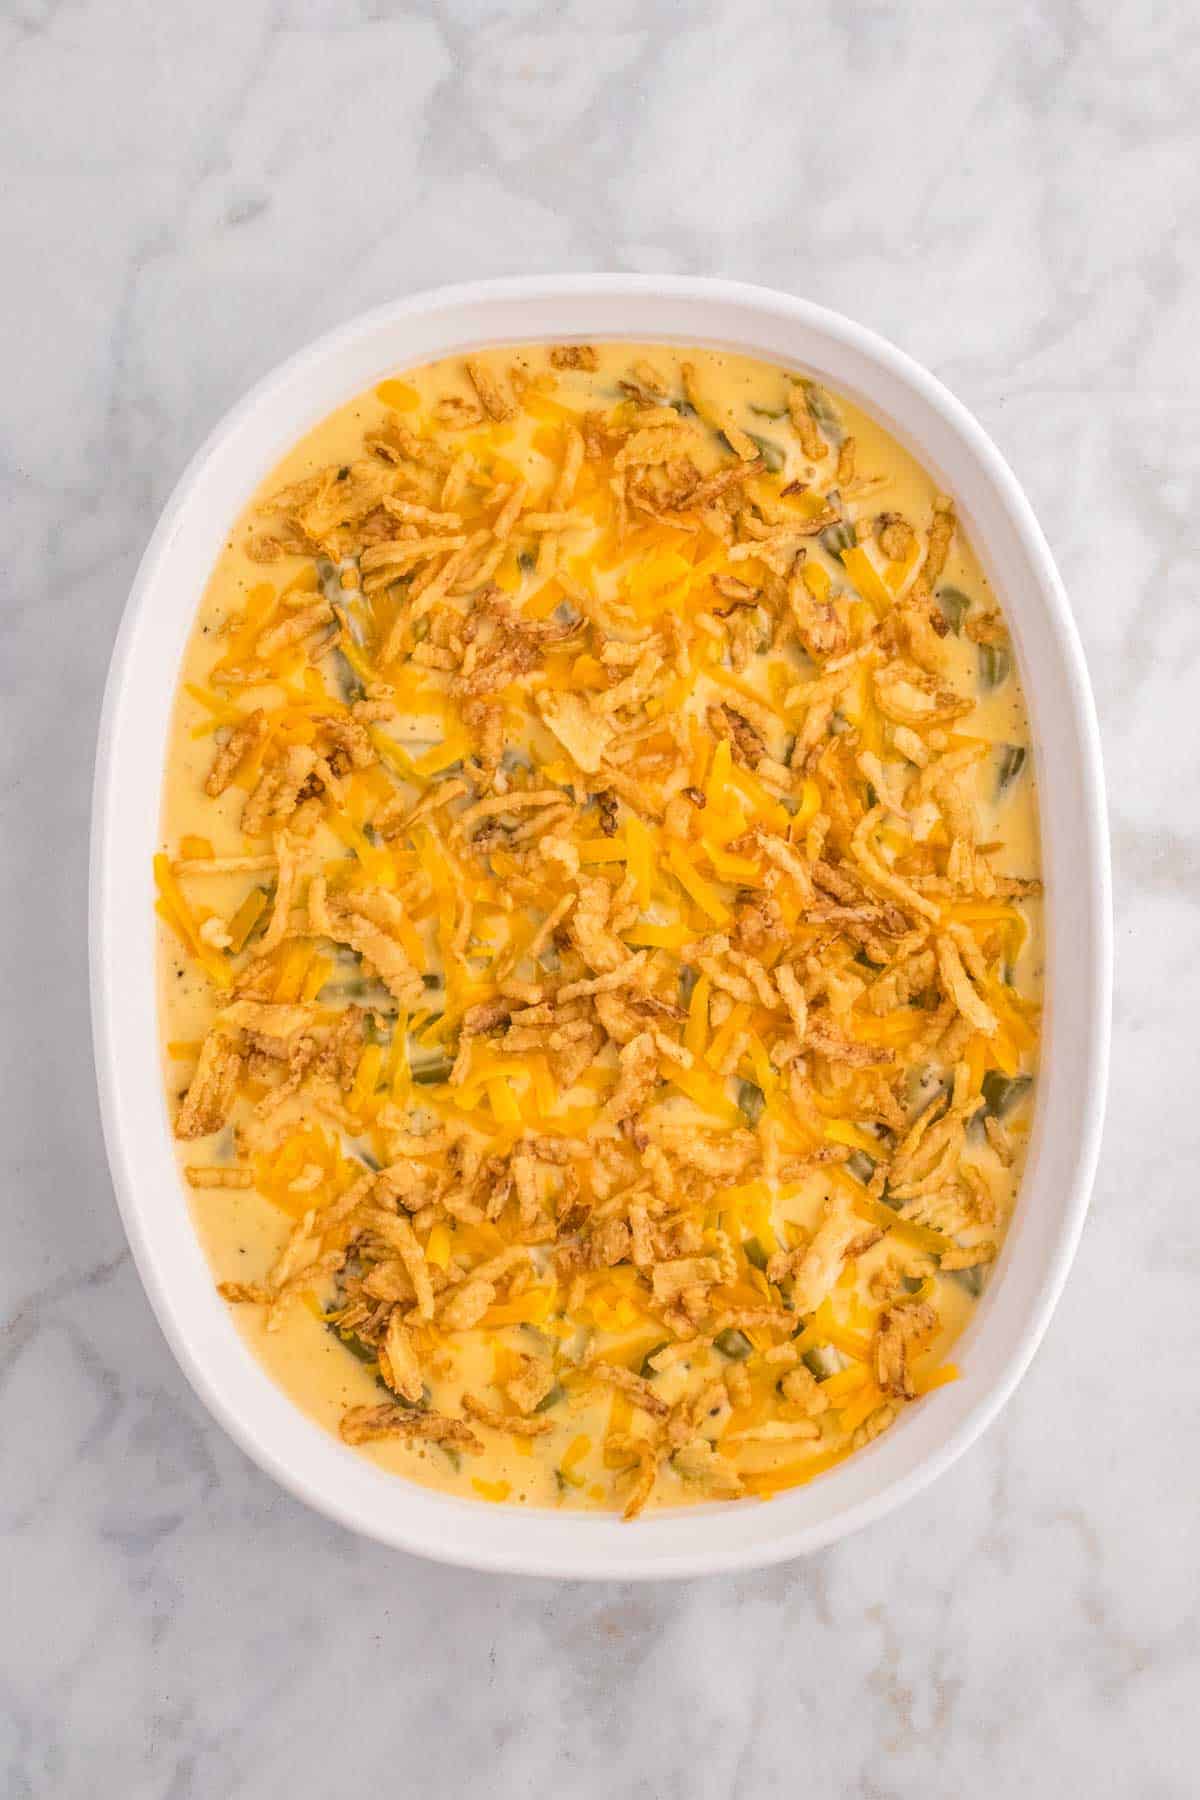 French's crispy fried onions sprinkled on top of green bean casserole before baking